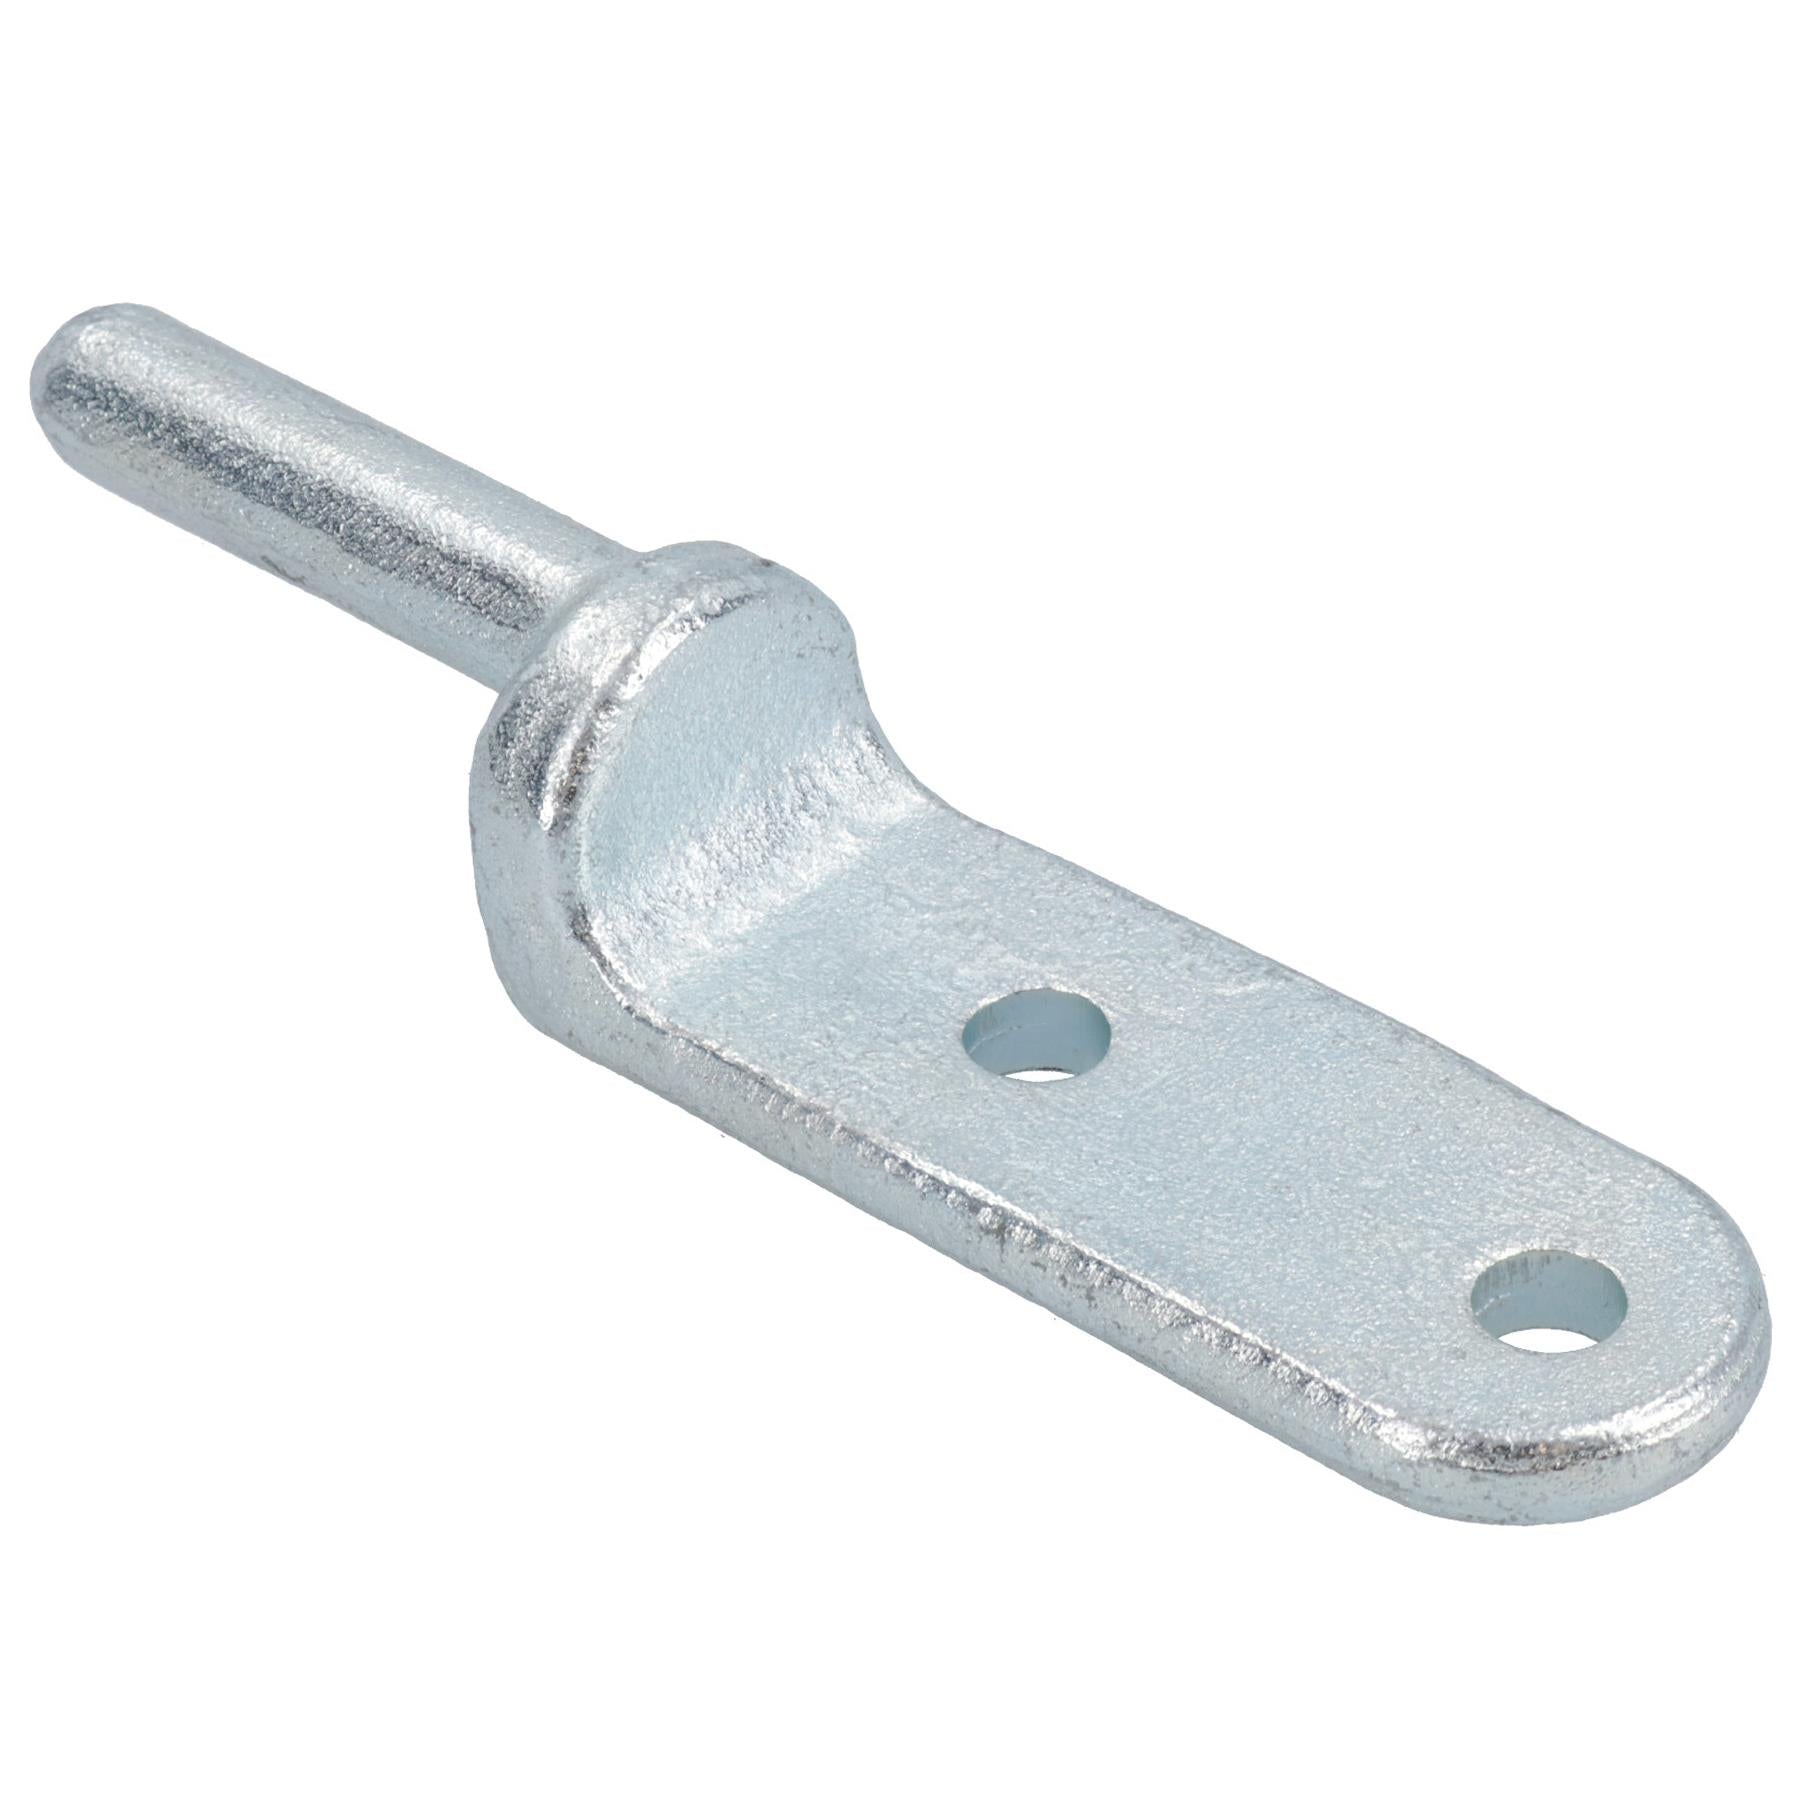 12.5mm Bolt On Gudgeon Tailboard Hinge Pin for Trucks Trailers Zinc Plated